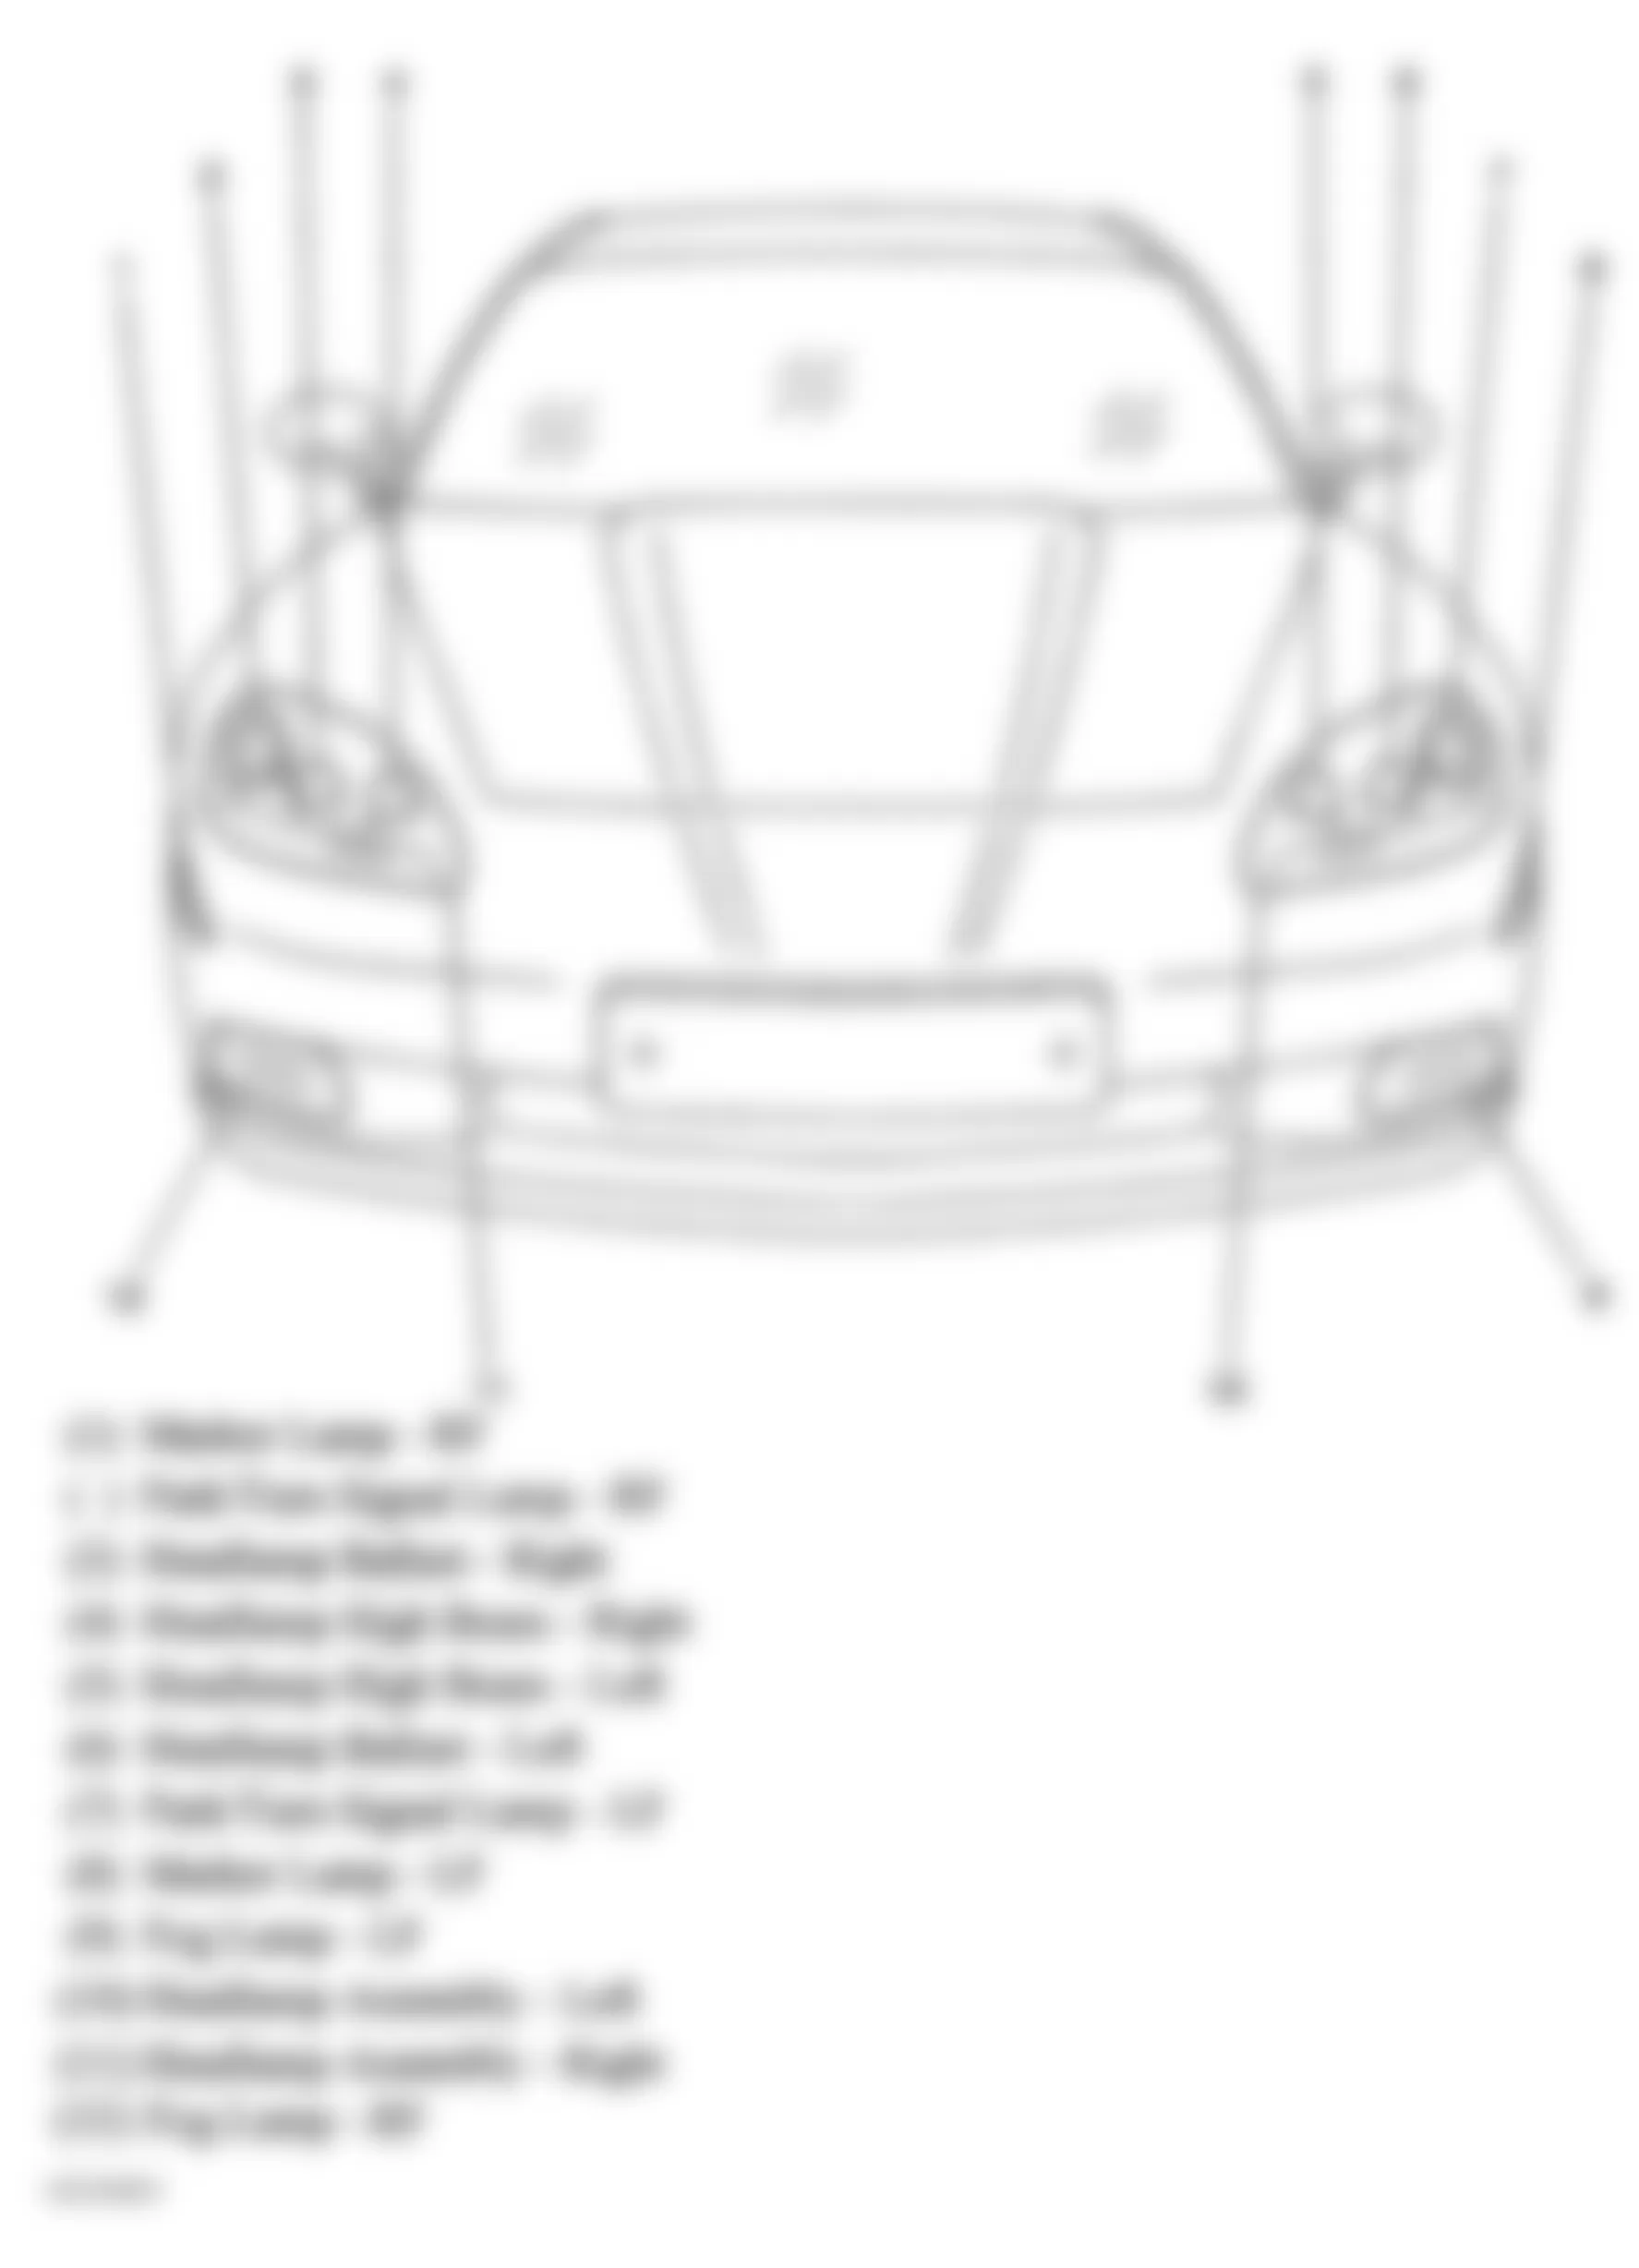 Chevrolet Corvette 2005 - Component Locations -  Front Of Vehicle